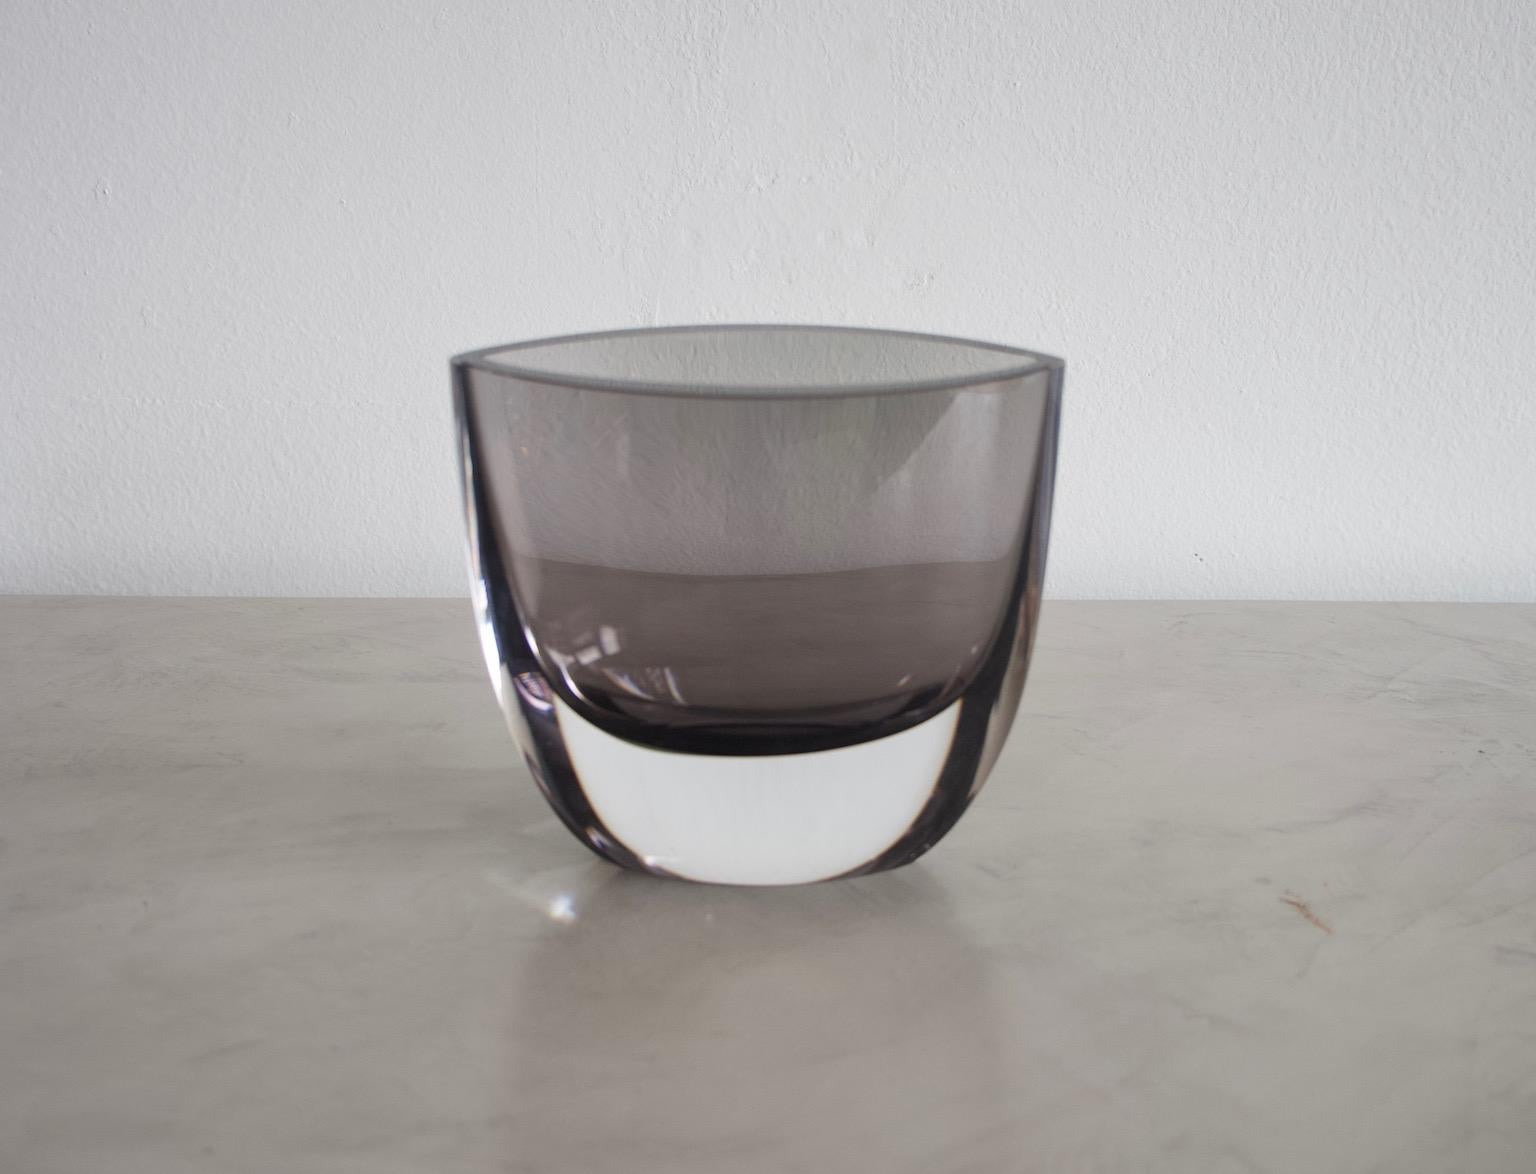 Smoke-colored glass vase with colorless overlap and almond-shaped cross-section designed by Christian von Sydow. Manufactured by Kosta Boda, Sweden. 
Engraved on the bottom: Kosta Boda H8873 C. v. Sydow.